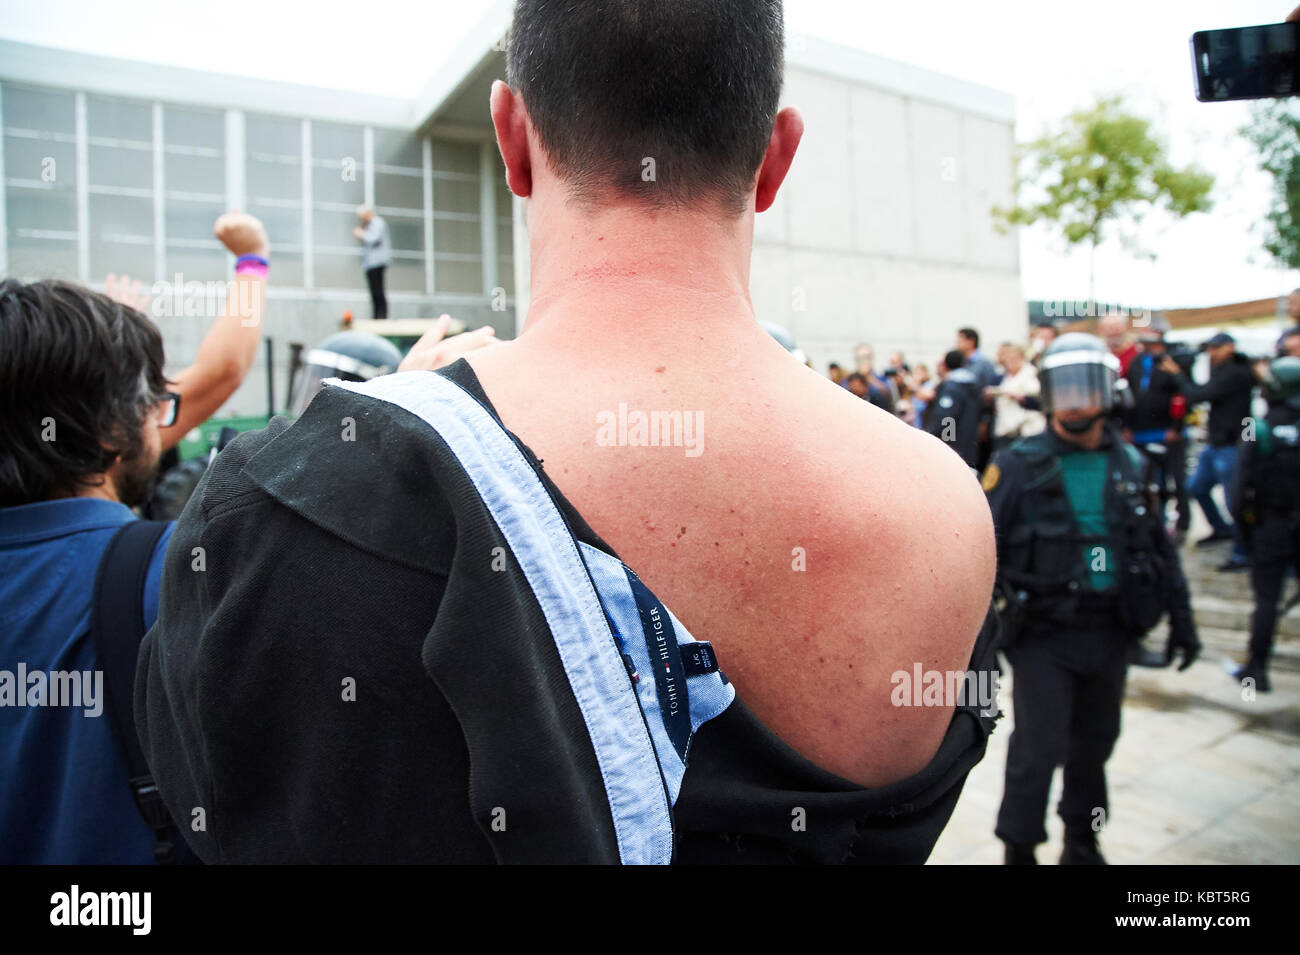 Girona, Spain. 1 October, 2017. A man injured by the Guardia Civil at Sant Julia de Ramis, place of vote of the catalan president Carles Puigdemont. The Guardia Civil charge against the people impeding that makes a vote. The referendum has been deemed illegal by the Spanish government in Madrid Credit: Pablo Guillen/Alamy Live News Stock Photo